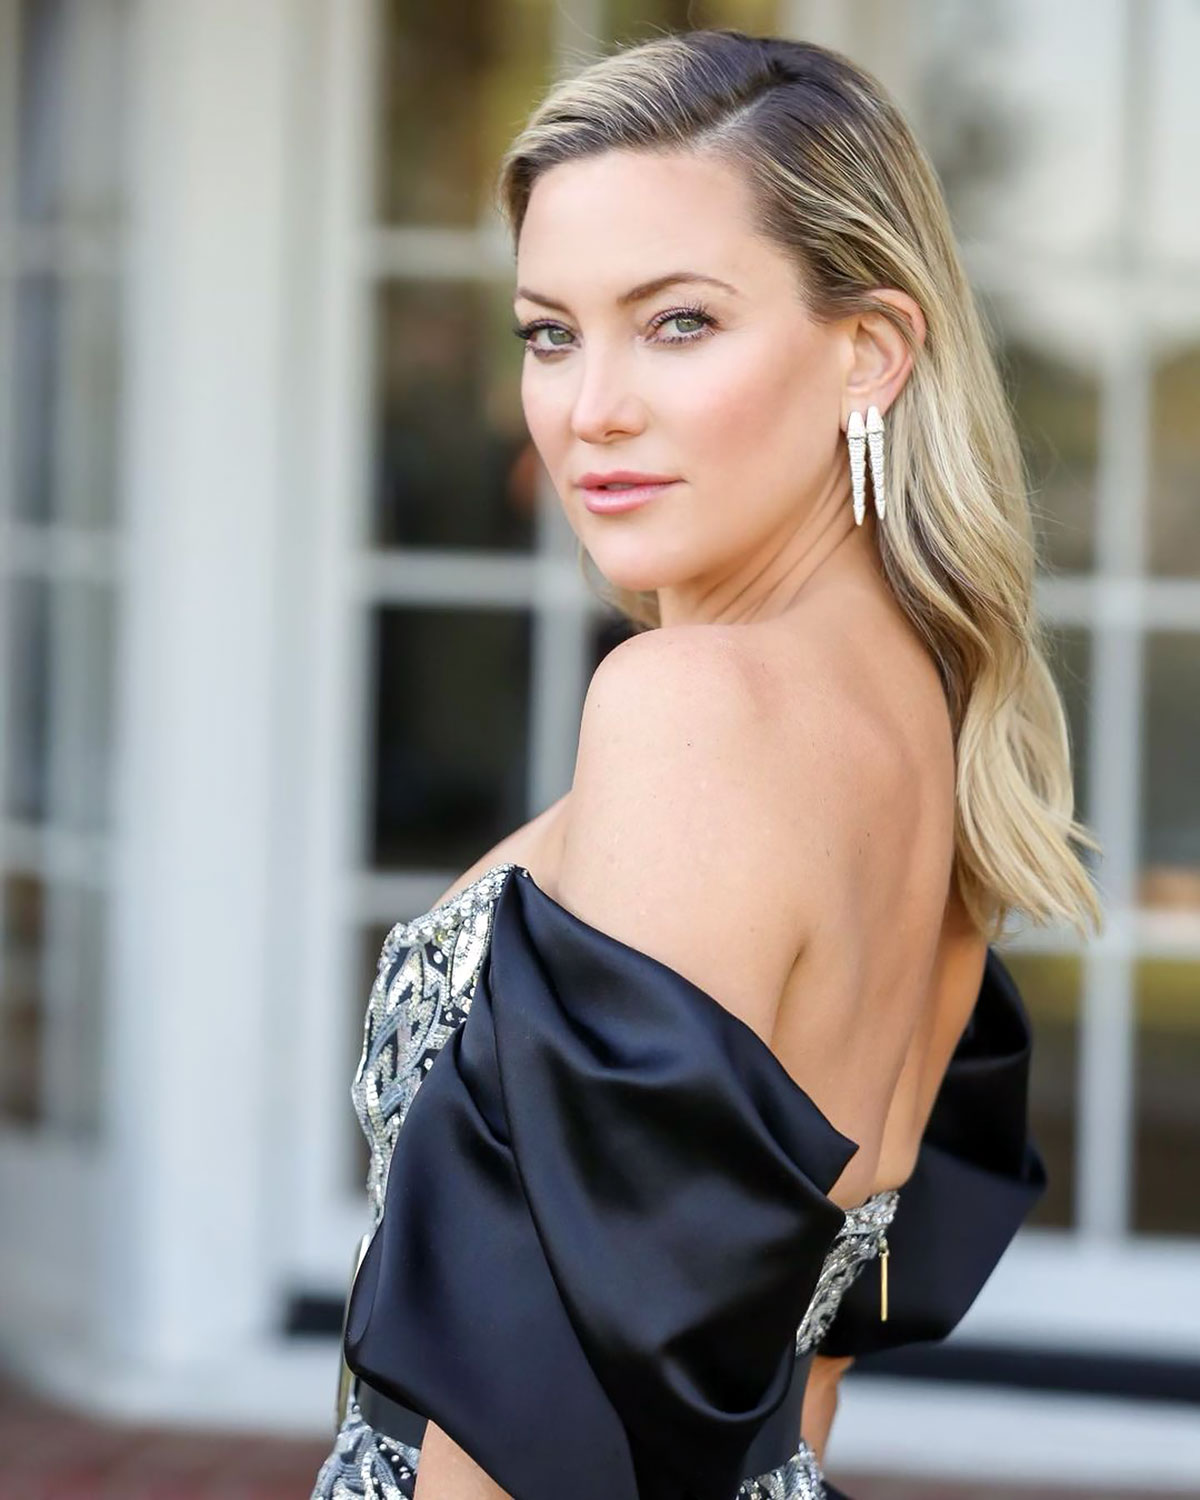 The Best Natural Diamond Jewelry Looks from the 2023 Golden Globes